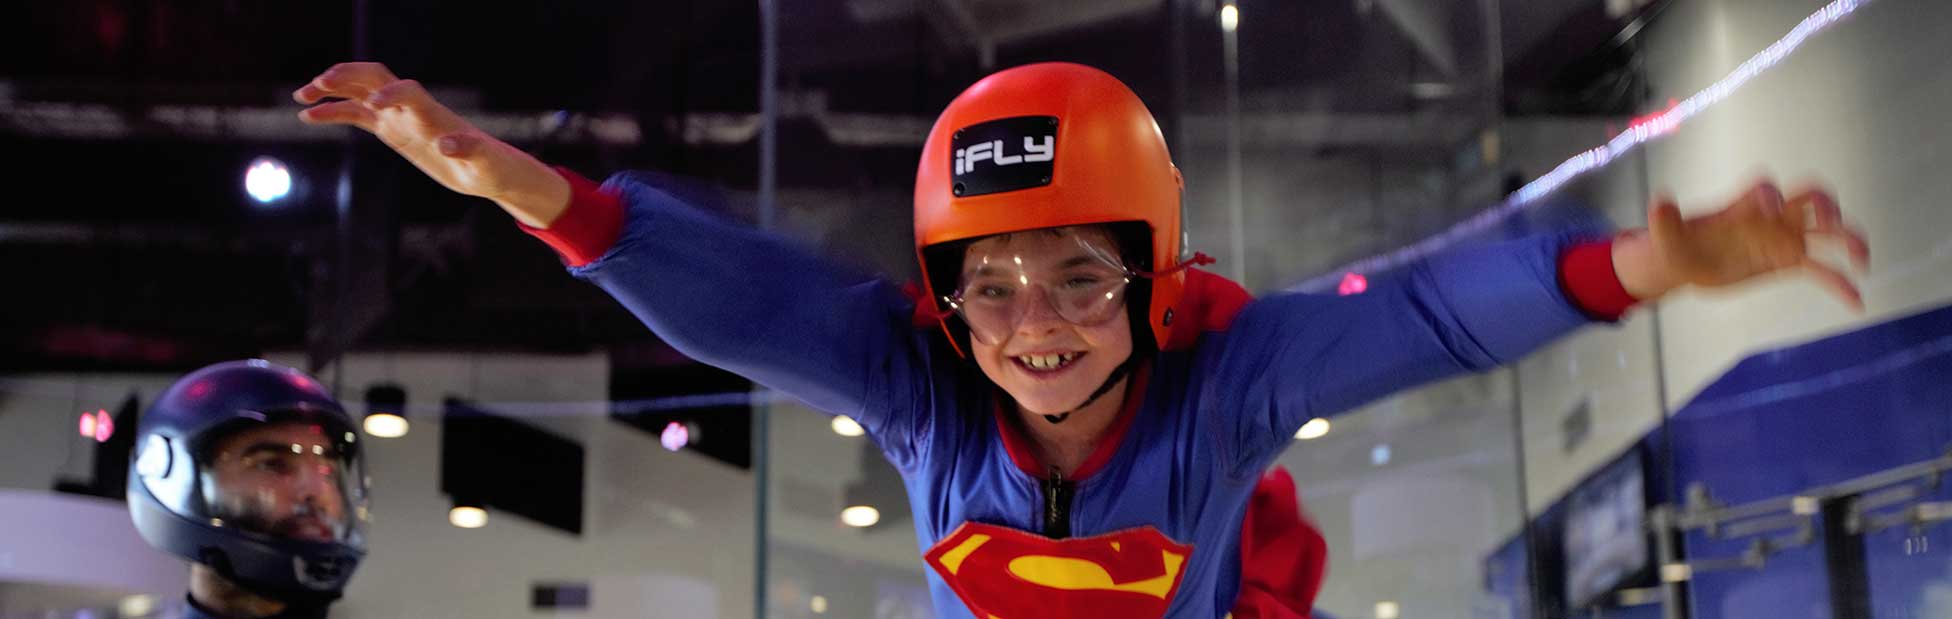 Child indoor skydiving wearing superman outfit